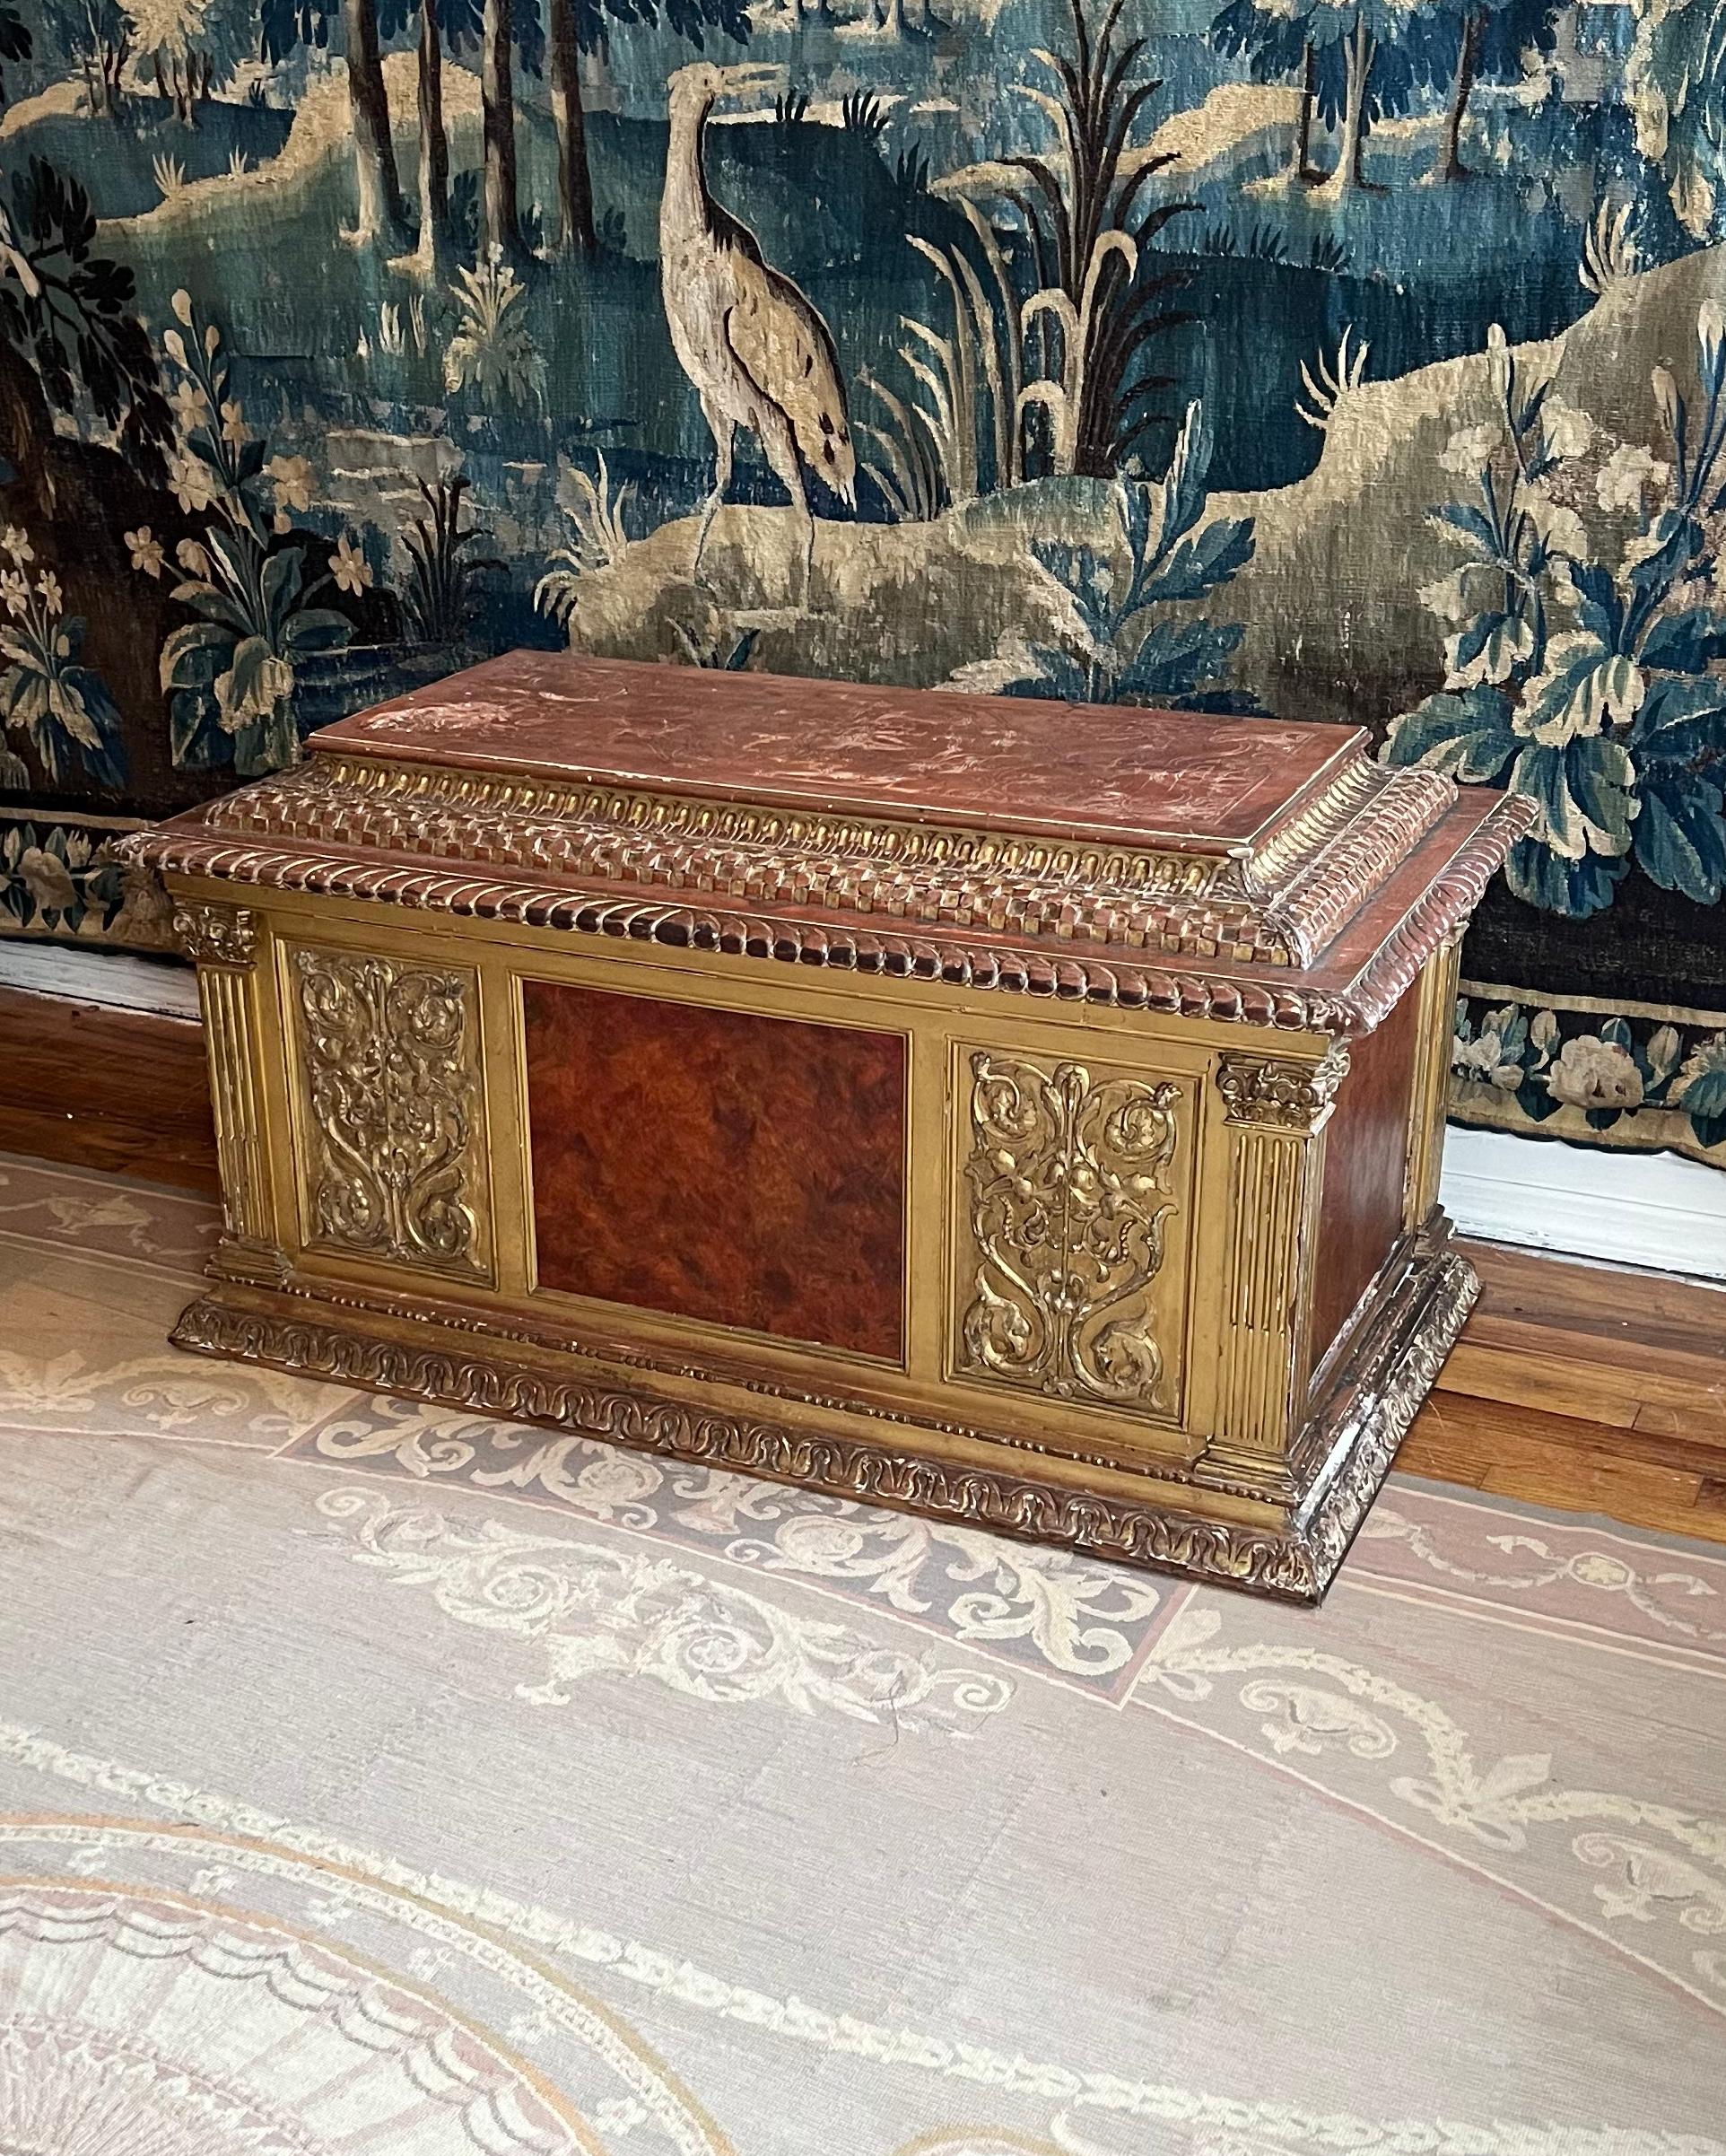 A grand Renaissance Revival coffer in the the style of 15th century Florence. The intricately carved and scribed lid with gadrooned edge displays a pomegranate motif originating from the Ottoman Empire and popular in Medieval and Renaissance Italy.